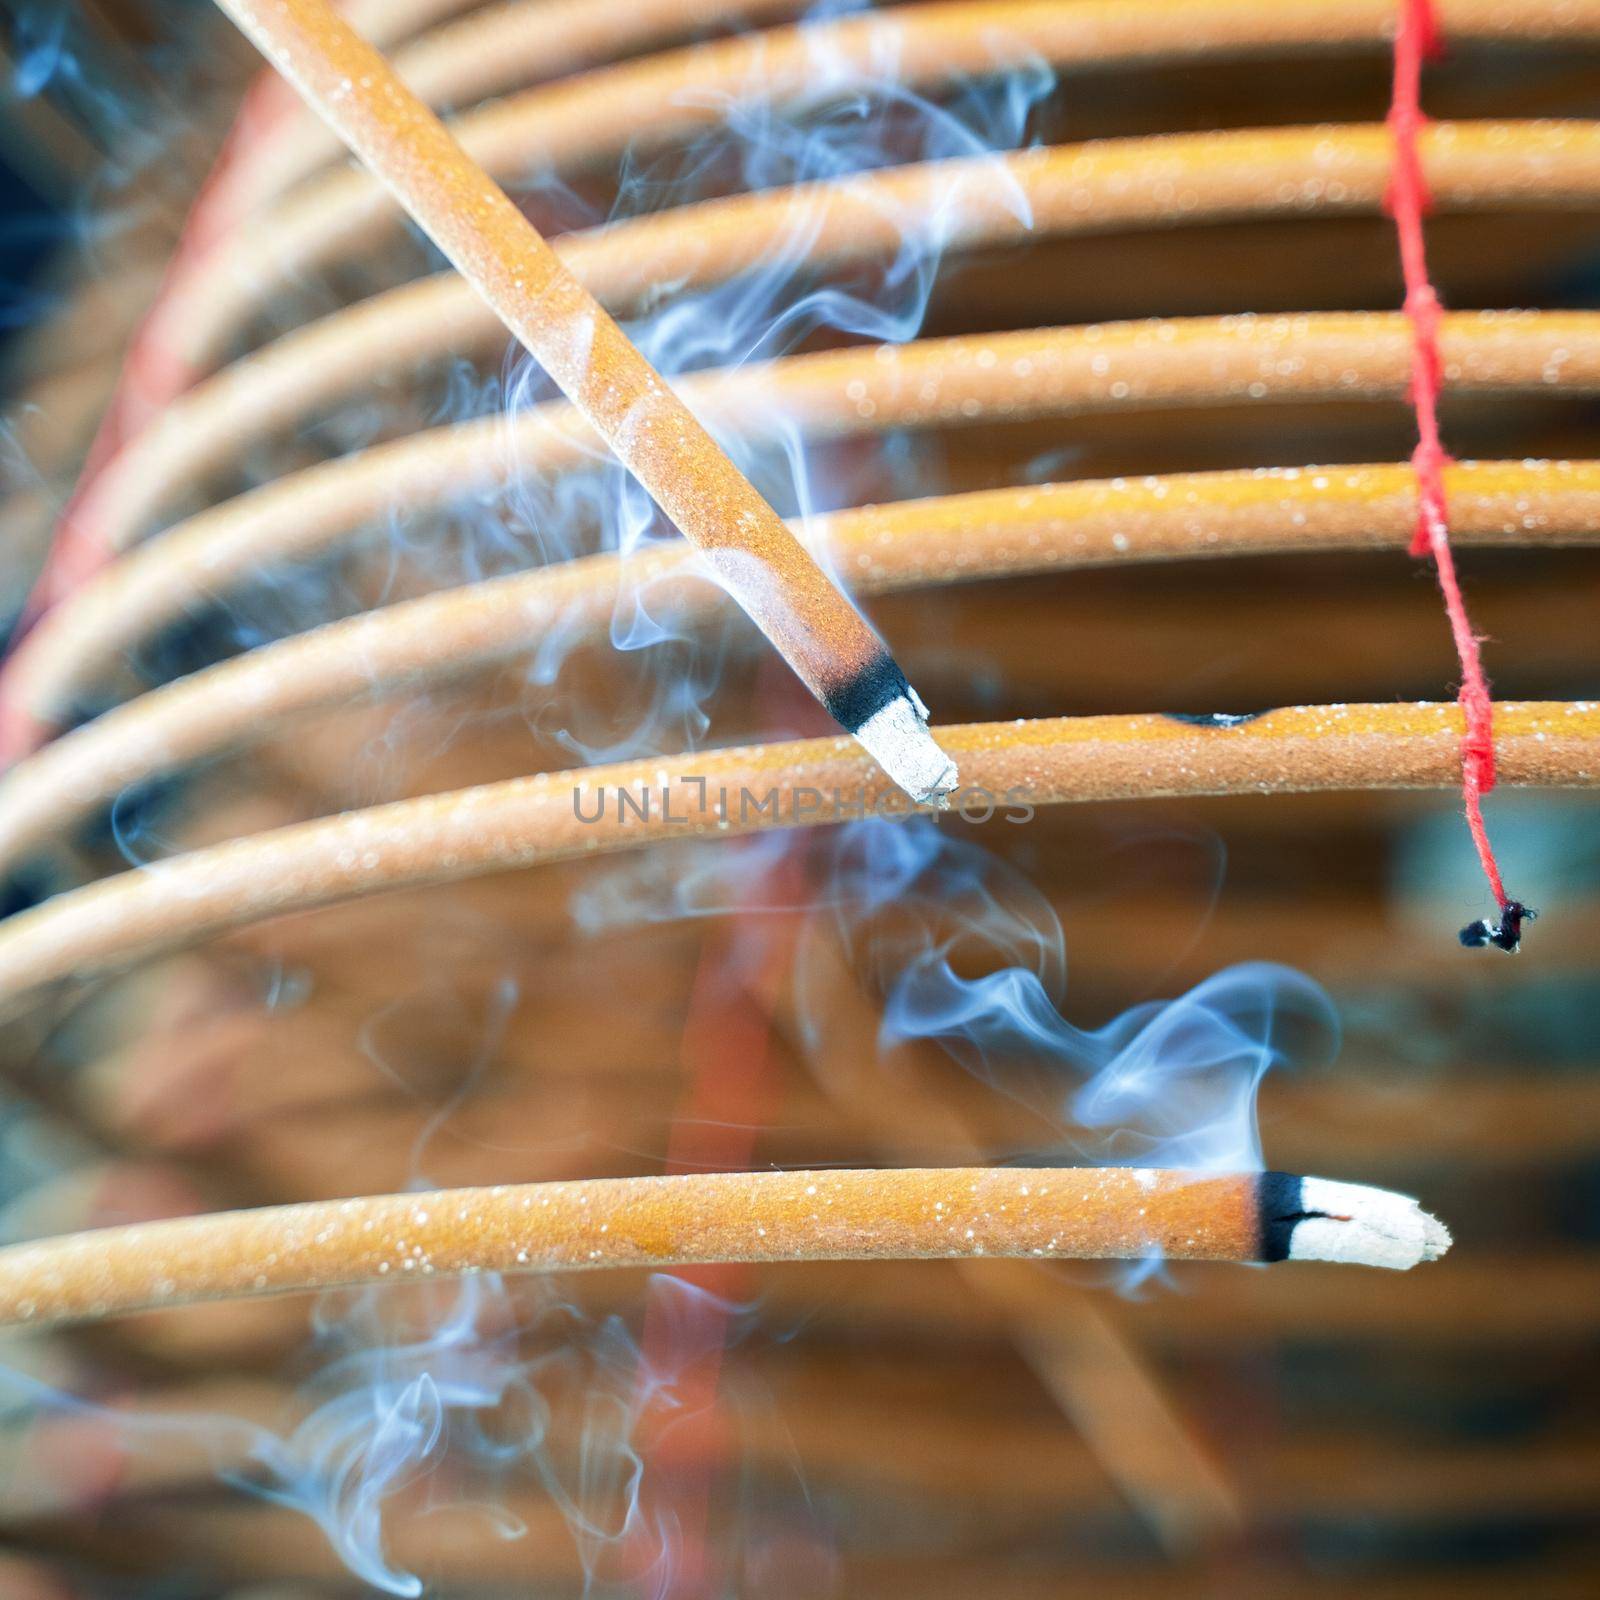 Burned coil swirl incense in Macau (Macao) temple,traditional Chinese cultural customs to worship god,close up,lifestyle. by ROMIXIMAGE